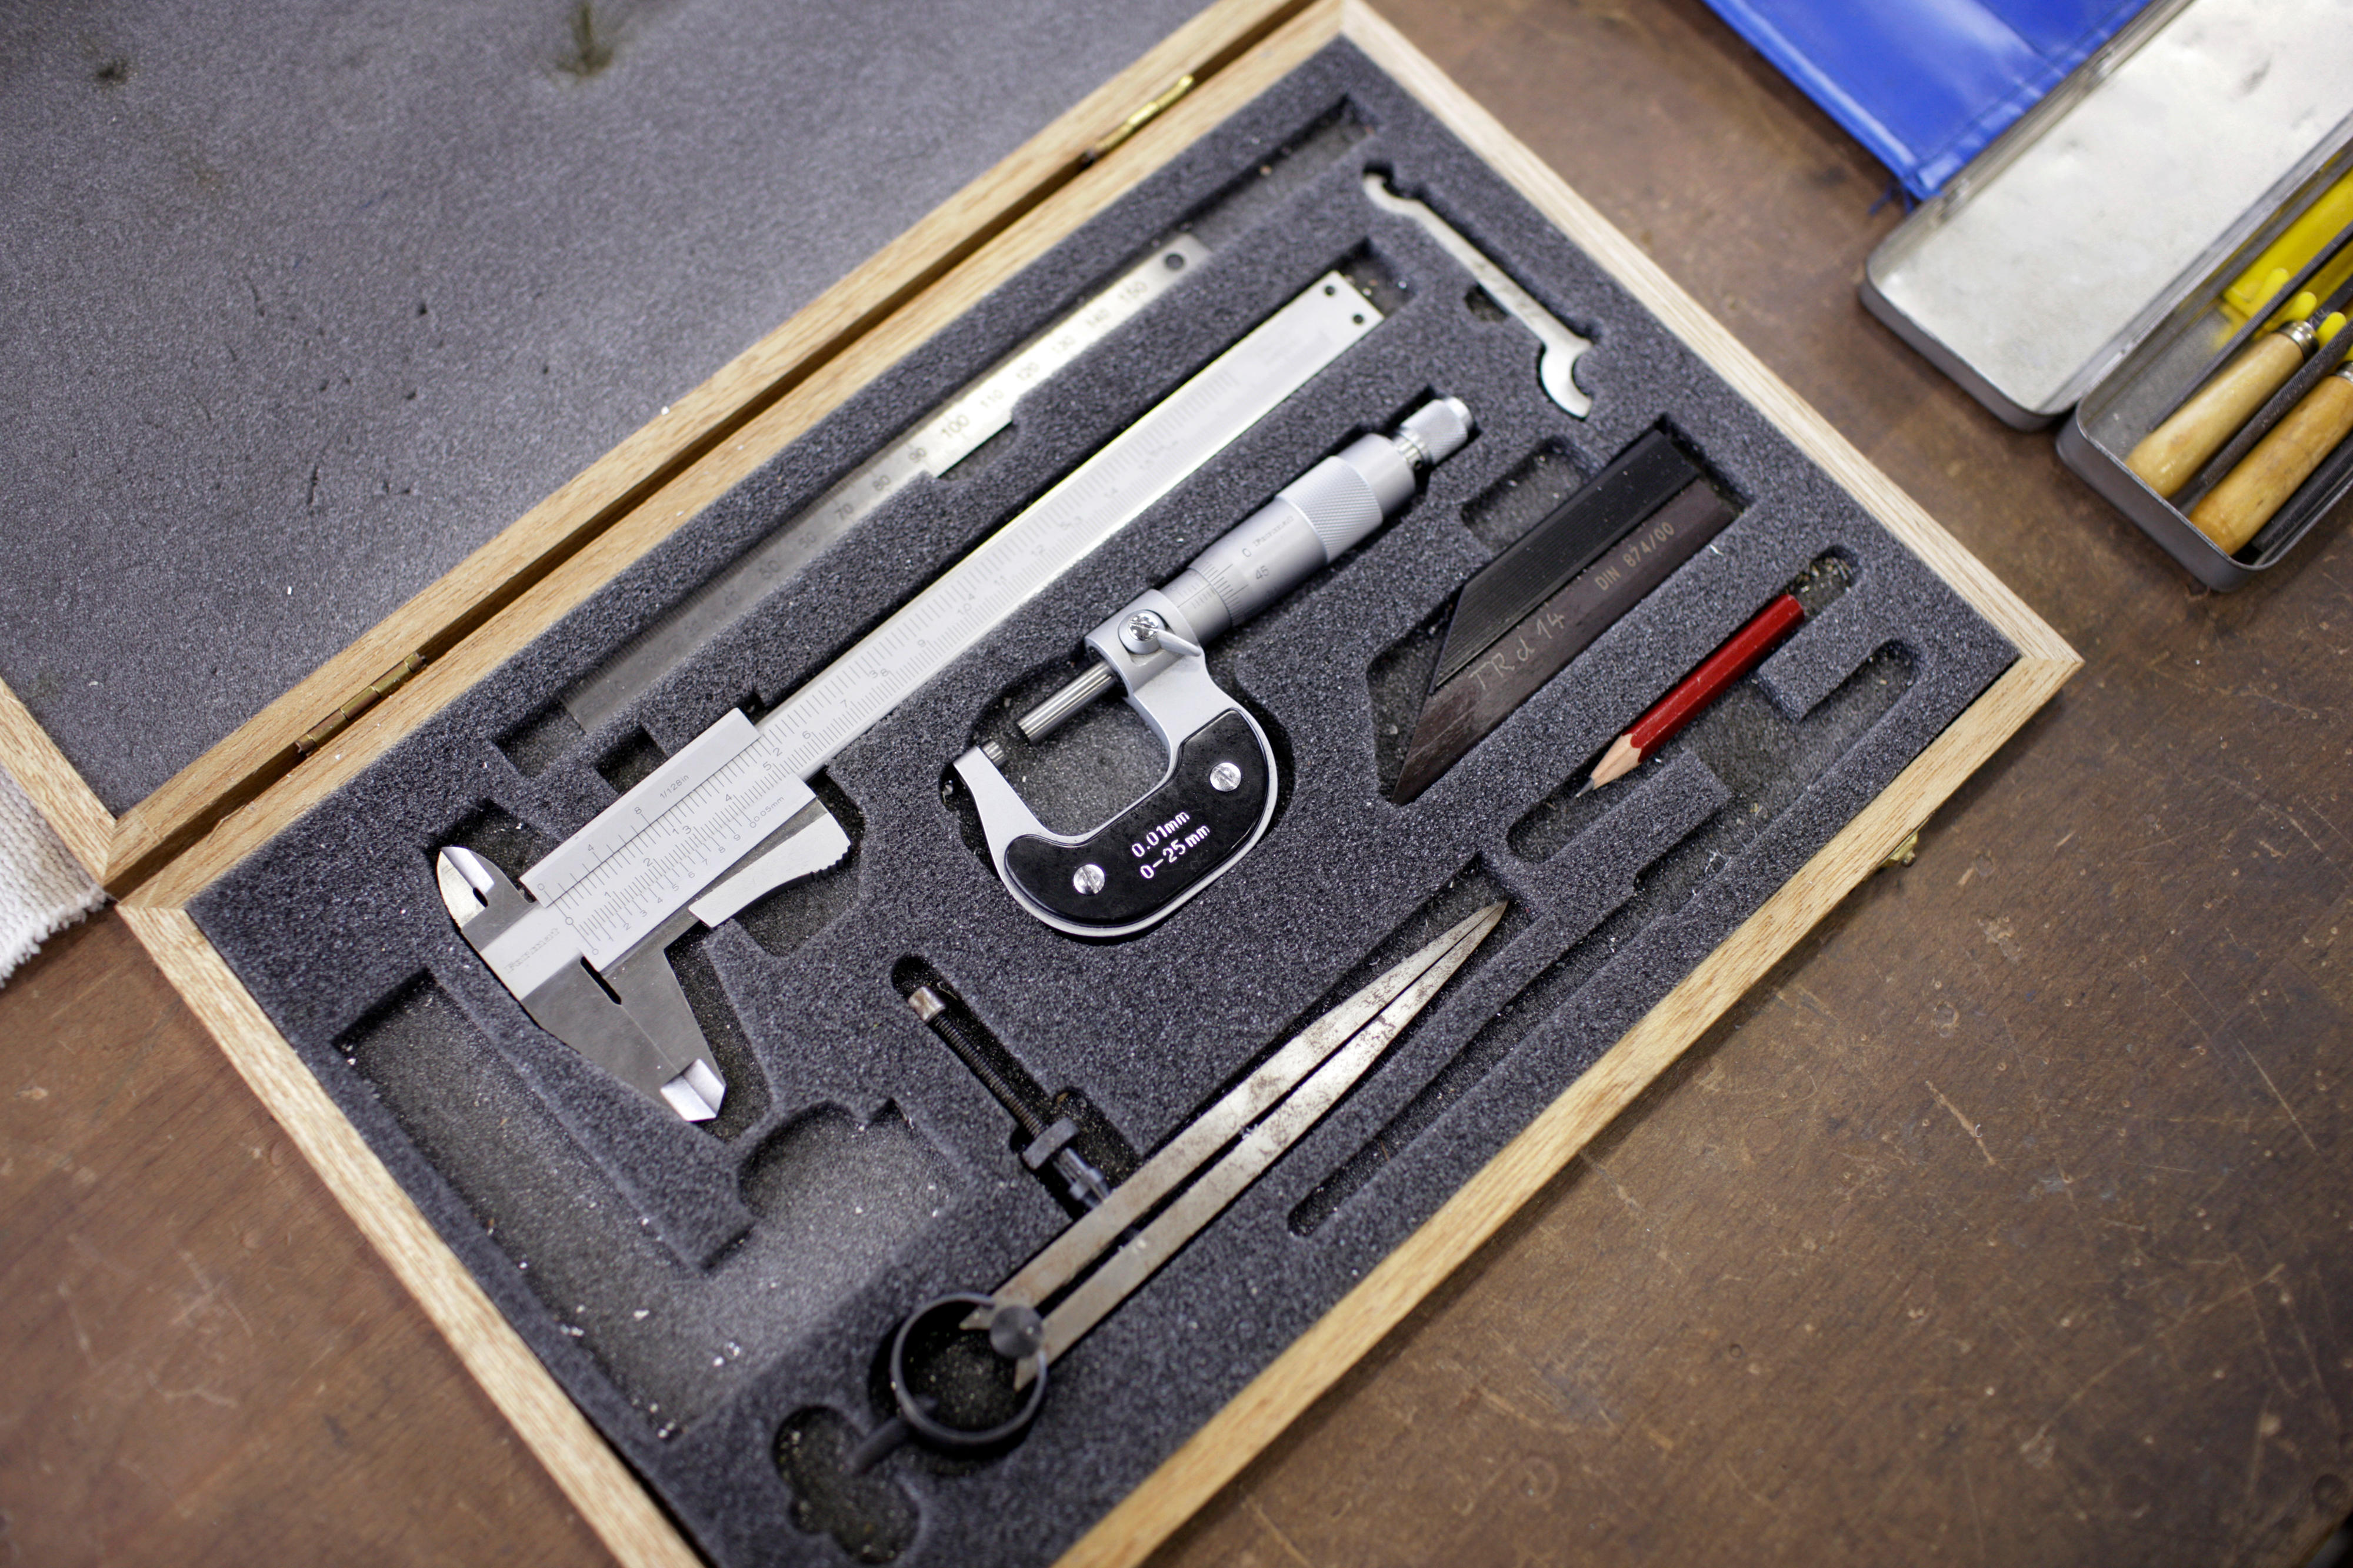 Measuring instruments in a wooden box